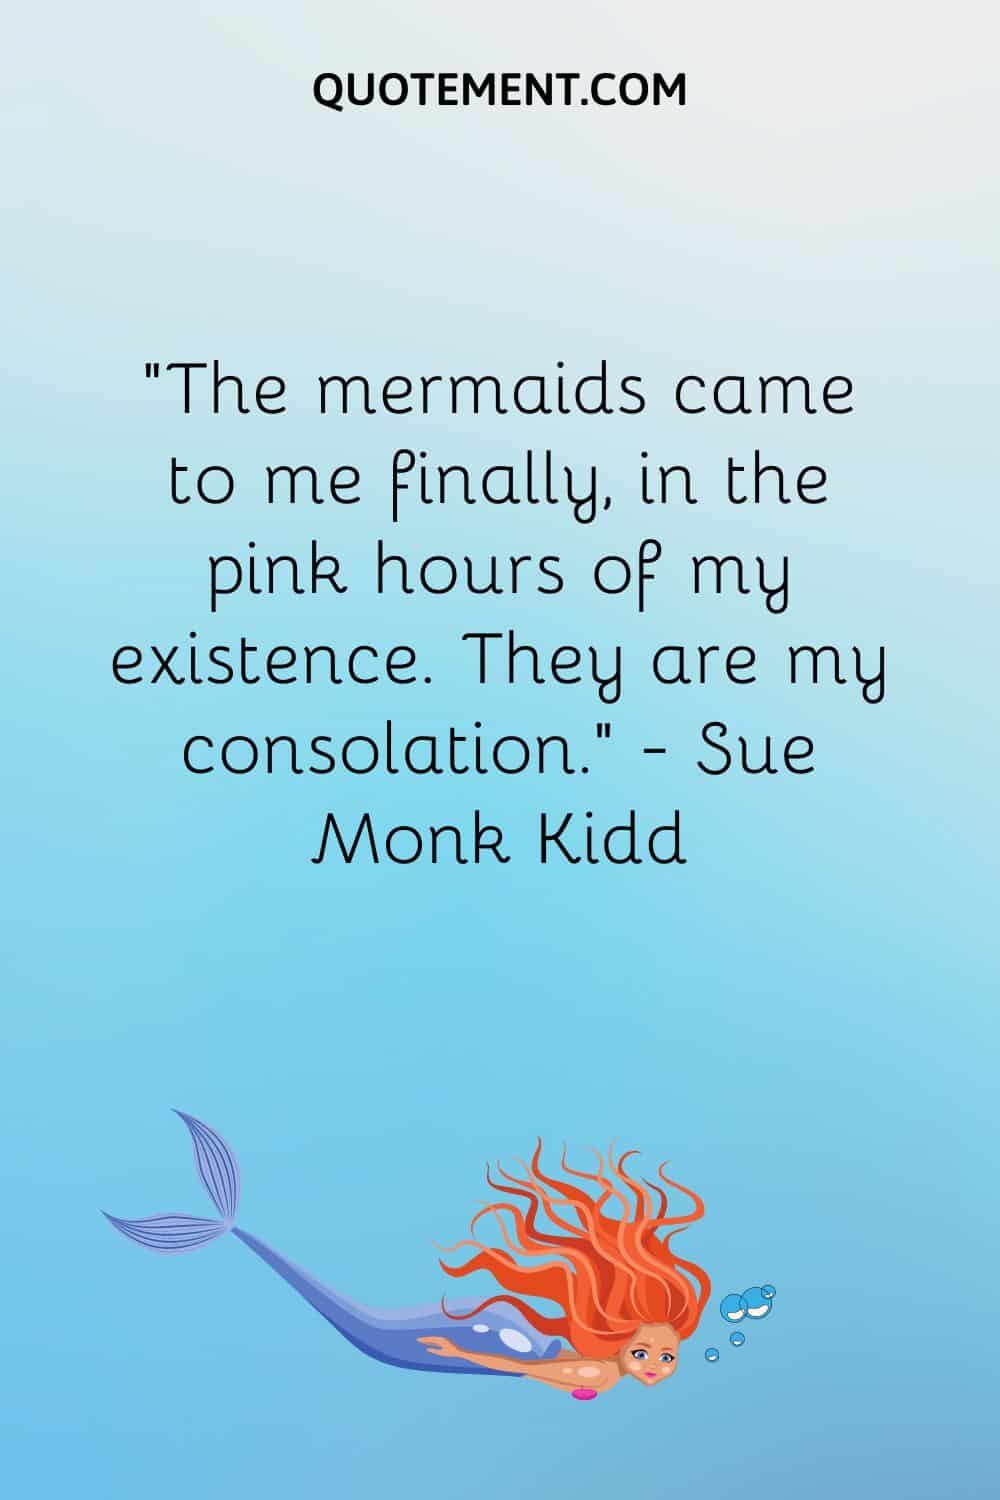 “The mermaids came to me finally, in the pink hours of my existence. They are my consolation.” ― Sue Monk Kidd